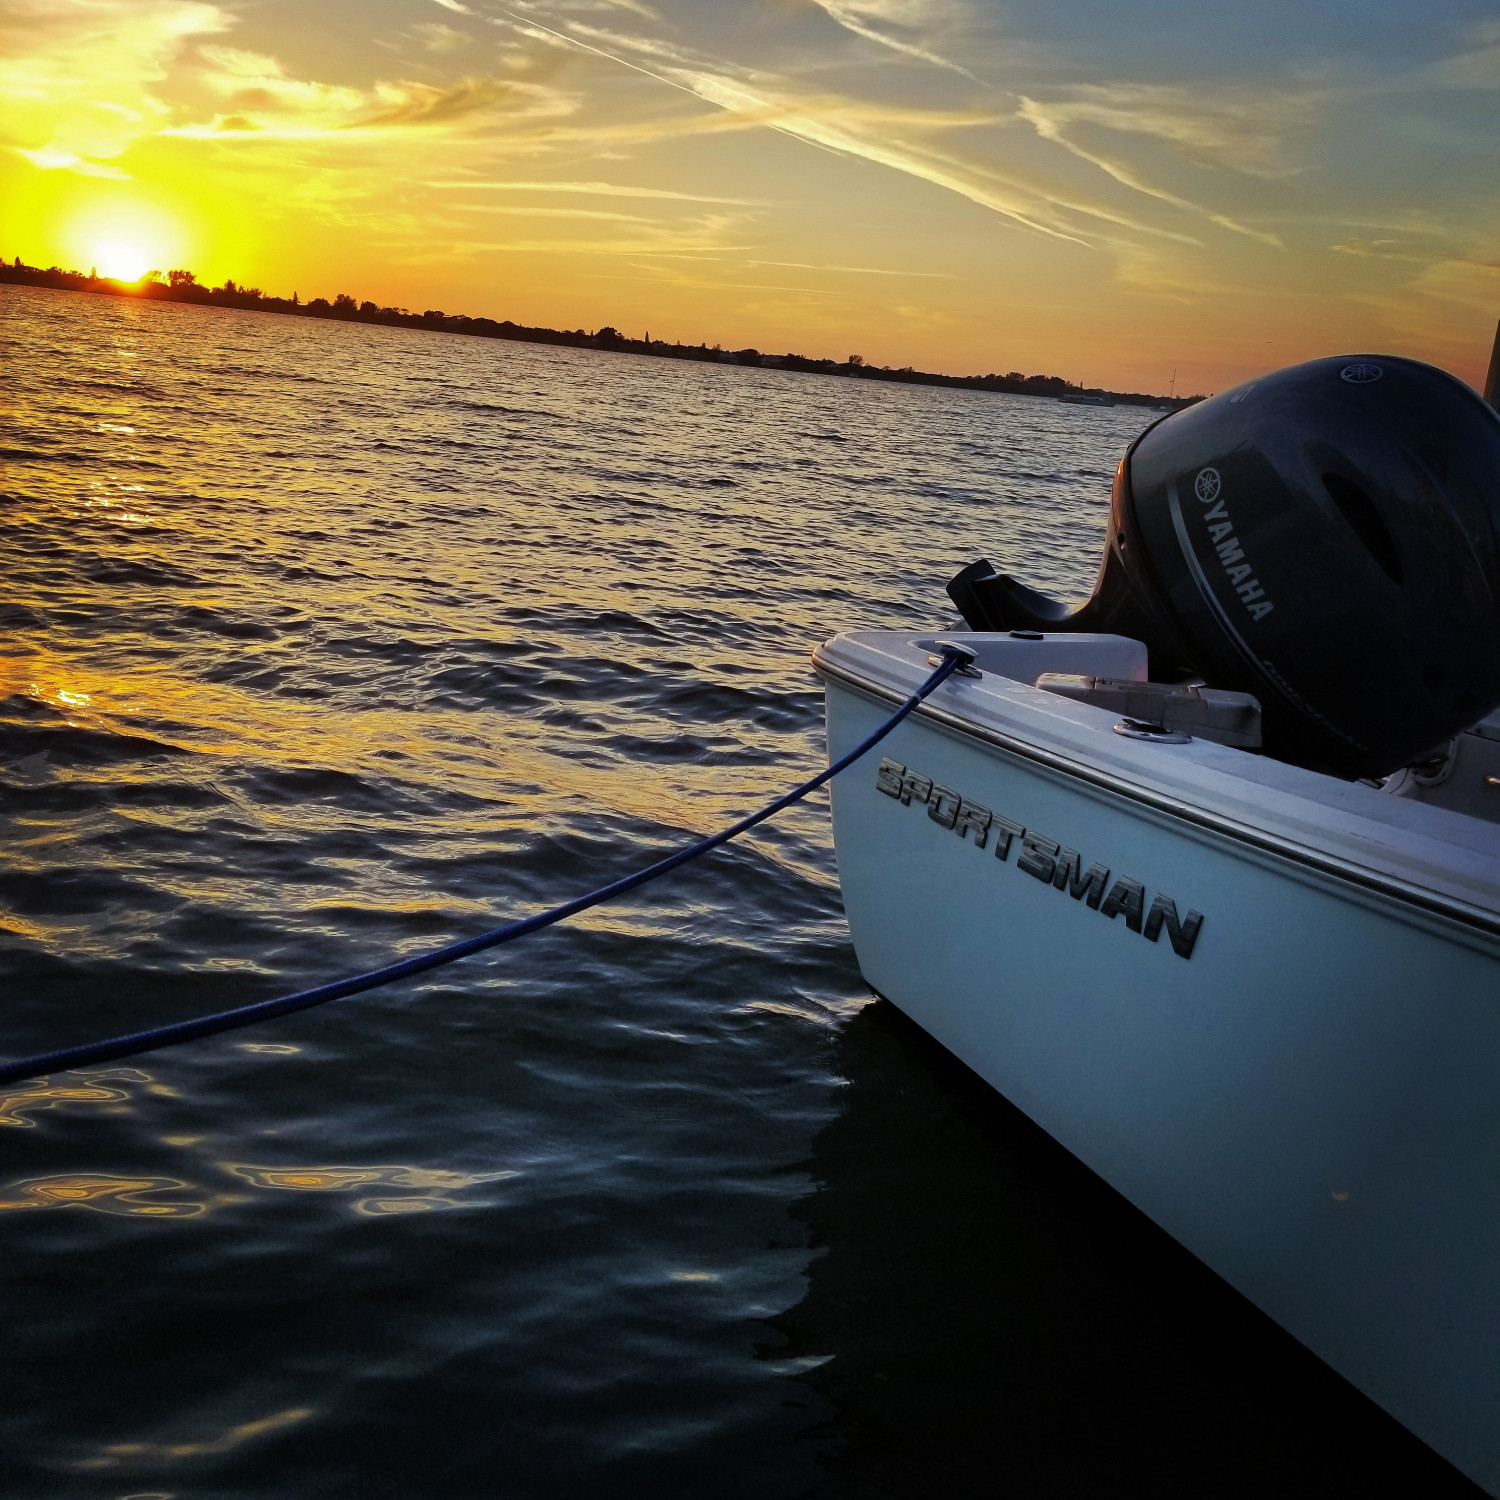 After an a amazing day exploring Lemon Bay, we hung out on the dock watching the sunset with th...